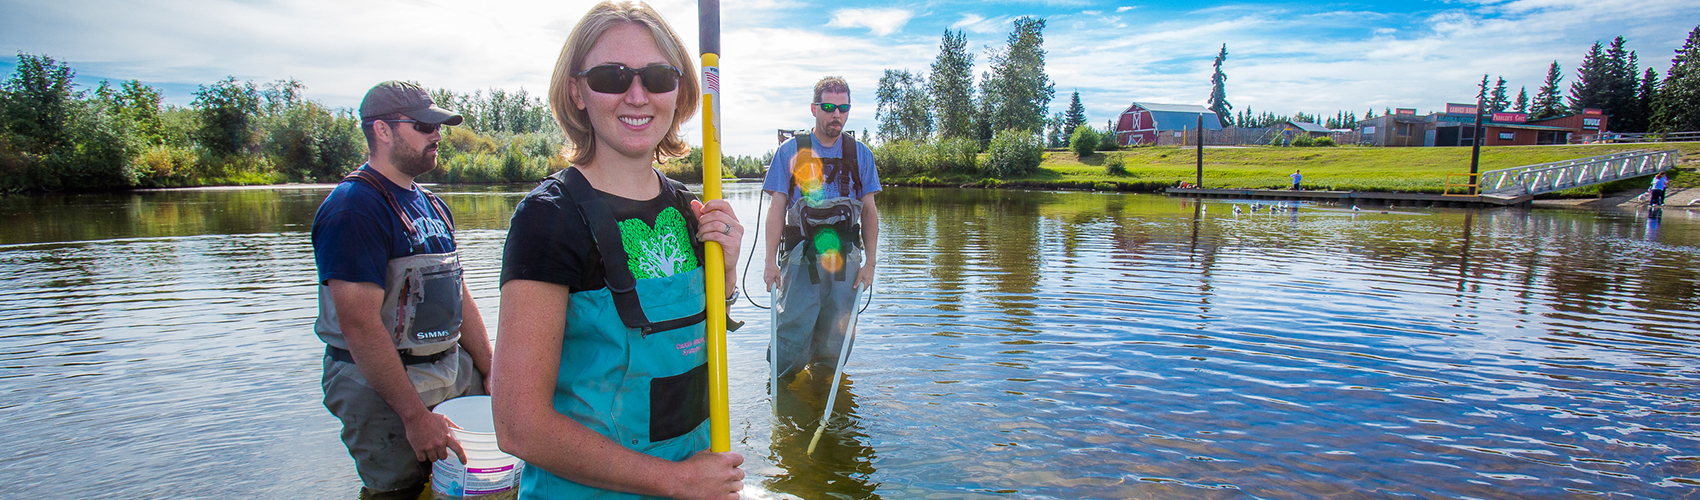 Undergraduate Patty McCall works with Fisheries Professor Trent Sutton, right, and master's candidate Nick Smith collecting live samples from the Chena River for their research on the life dynamics of Arctic brook lampreys.